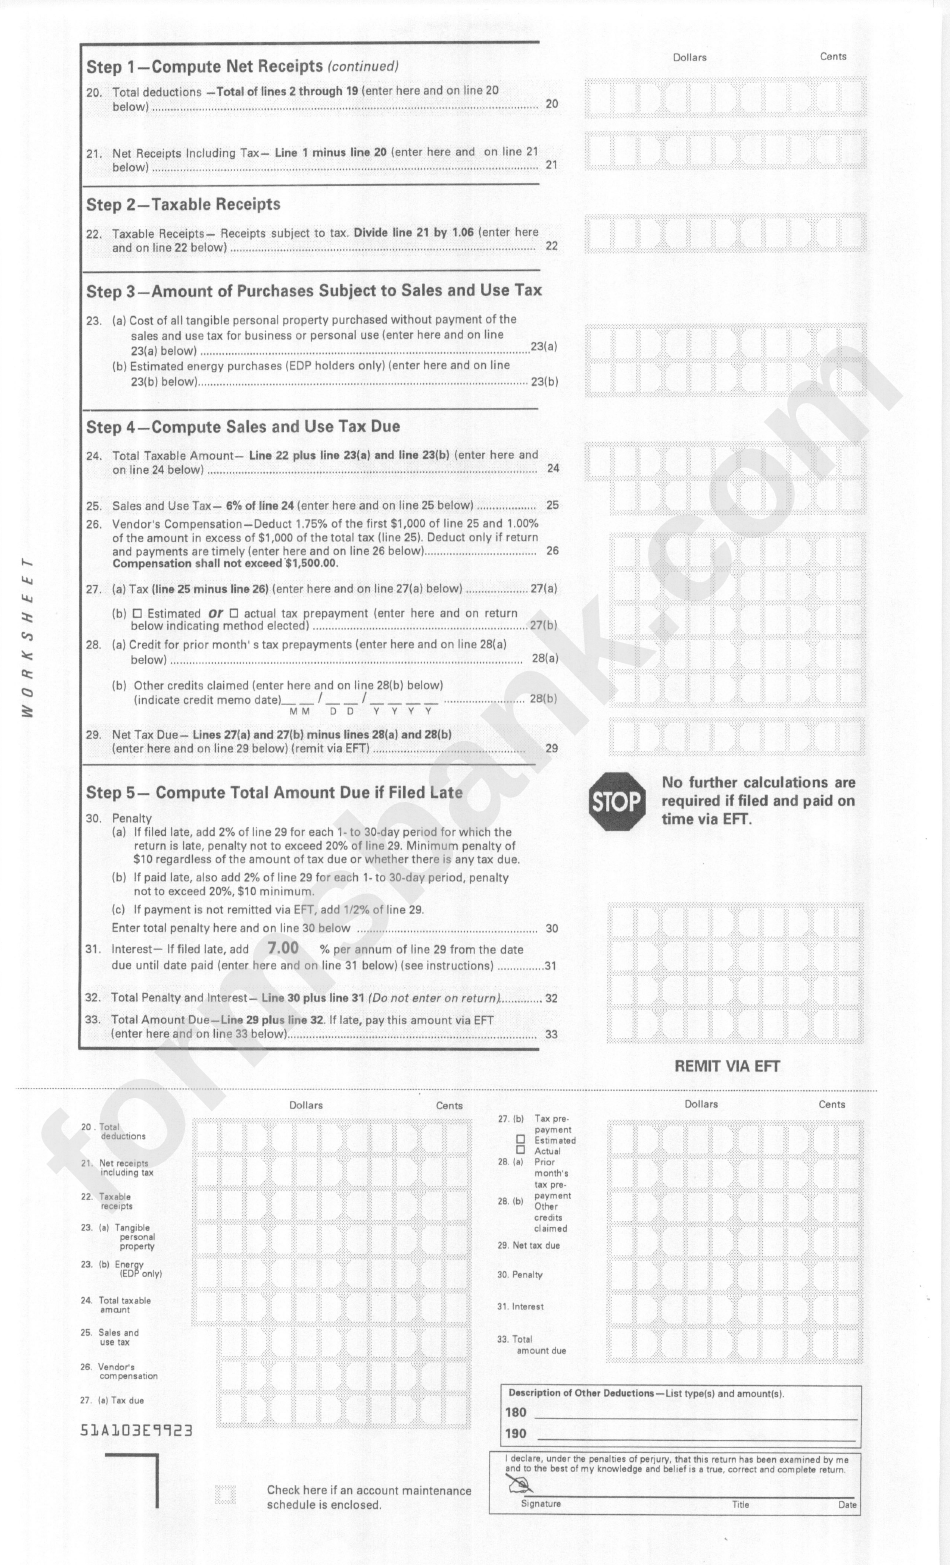 Form 51a103e - Kentucky Accelerated Sales And Use Tax Worksheet